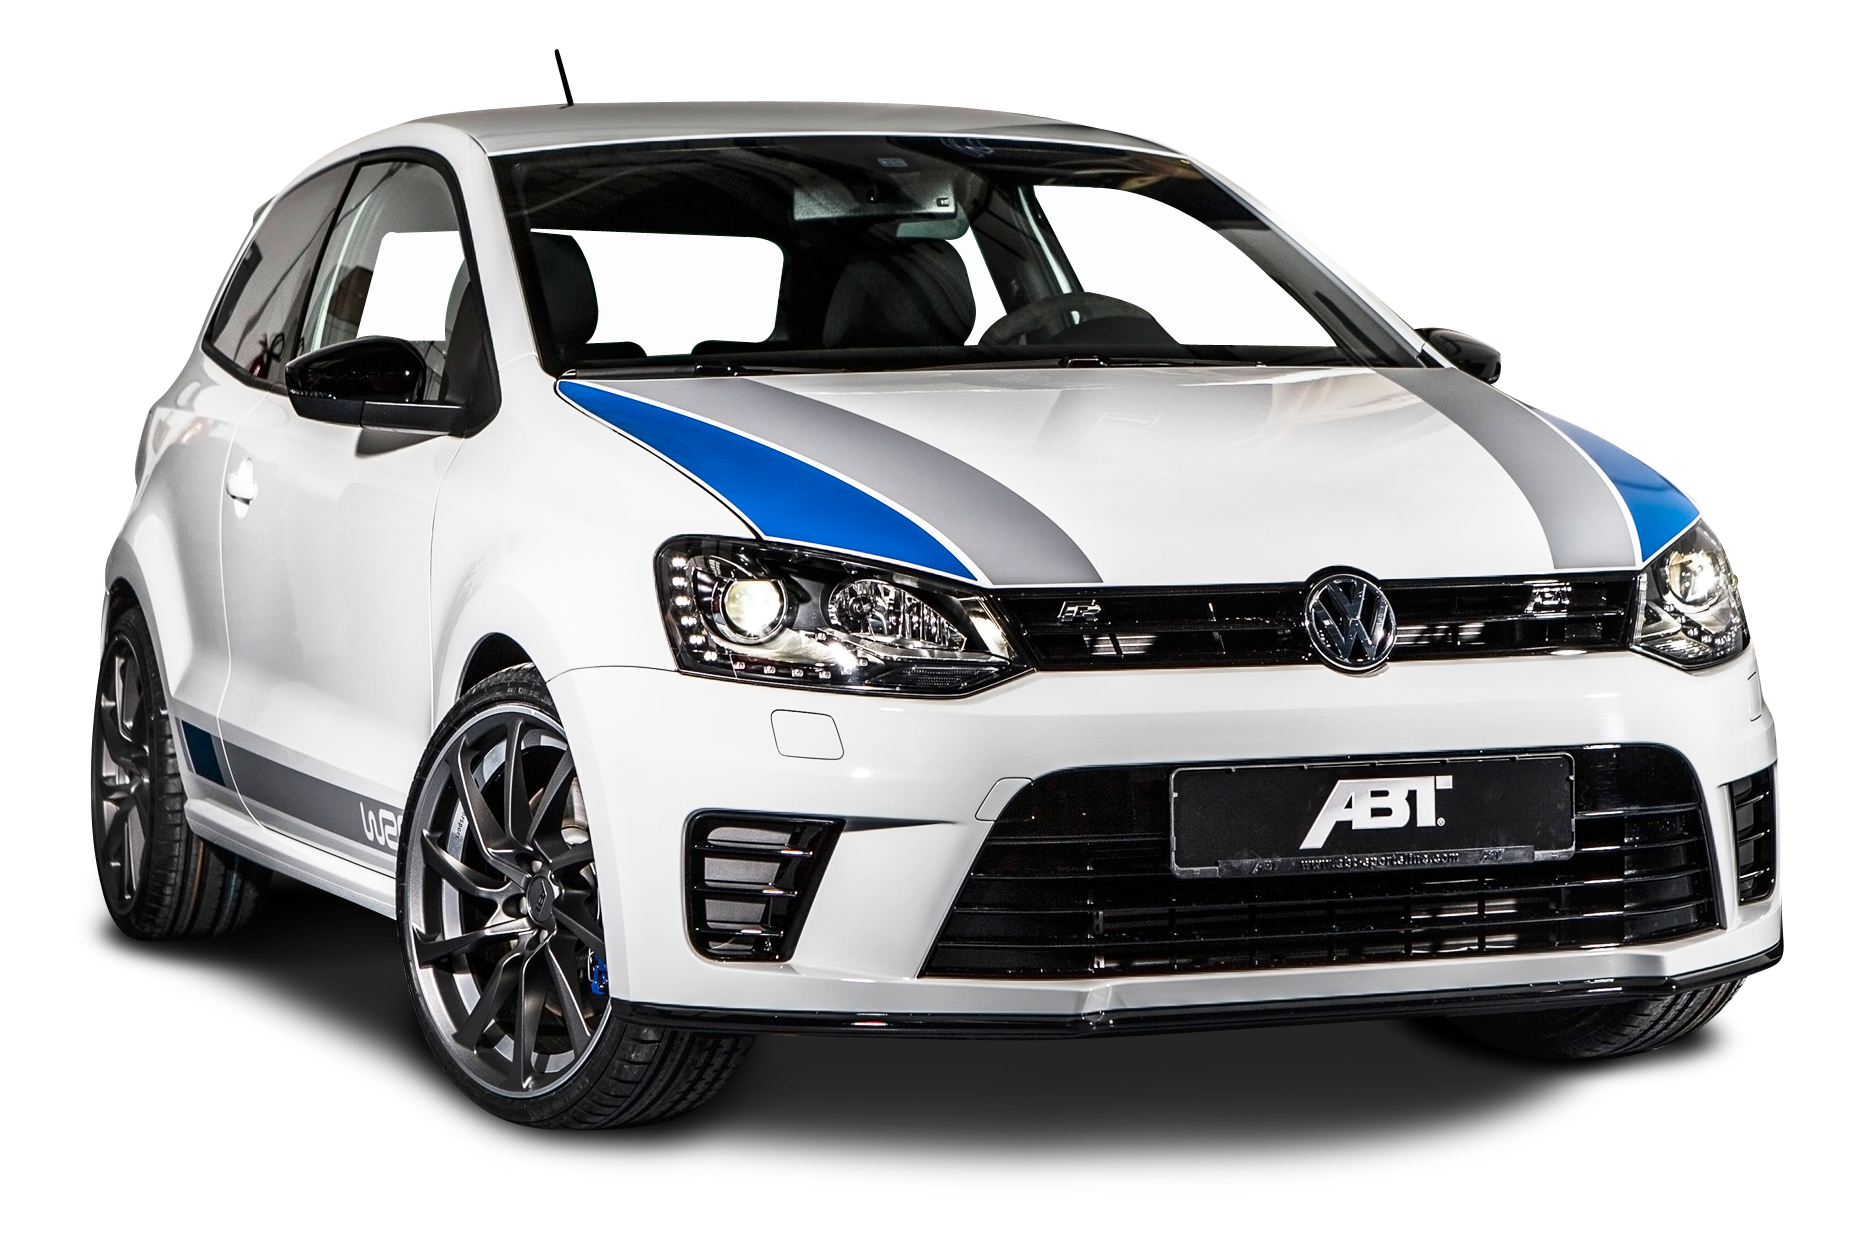 Volkswagen Polo R WRC Car PNG